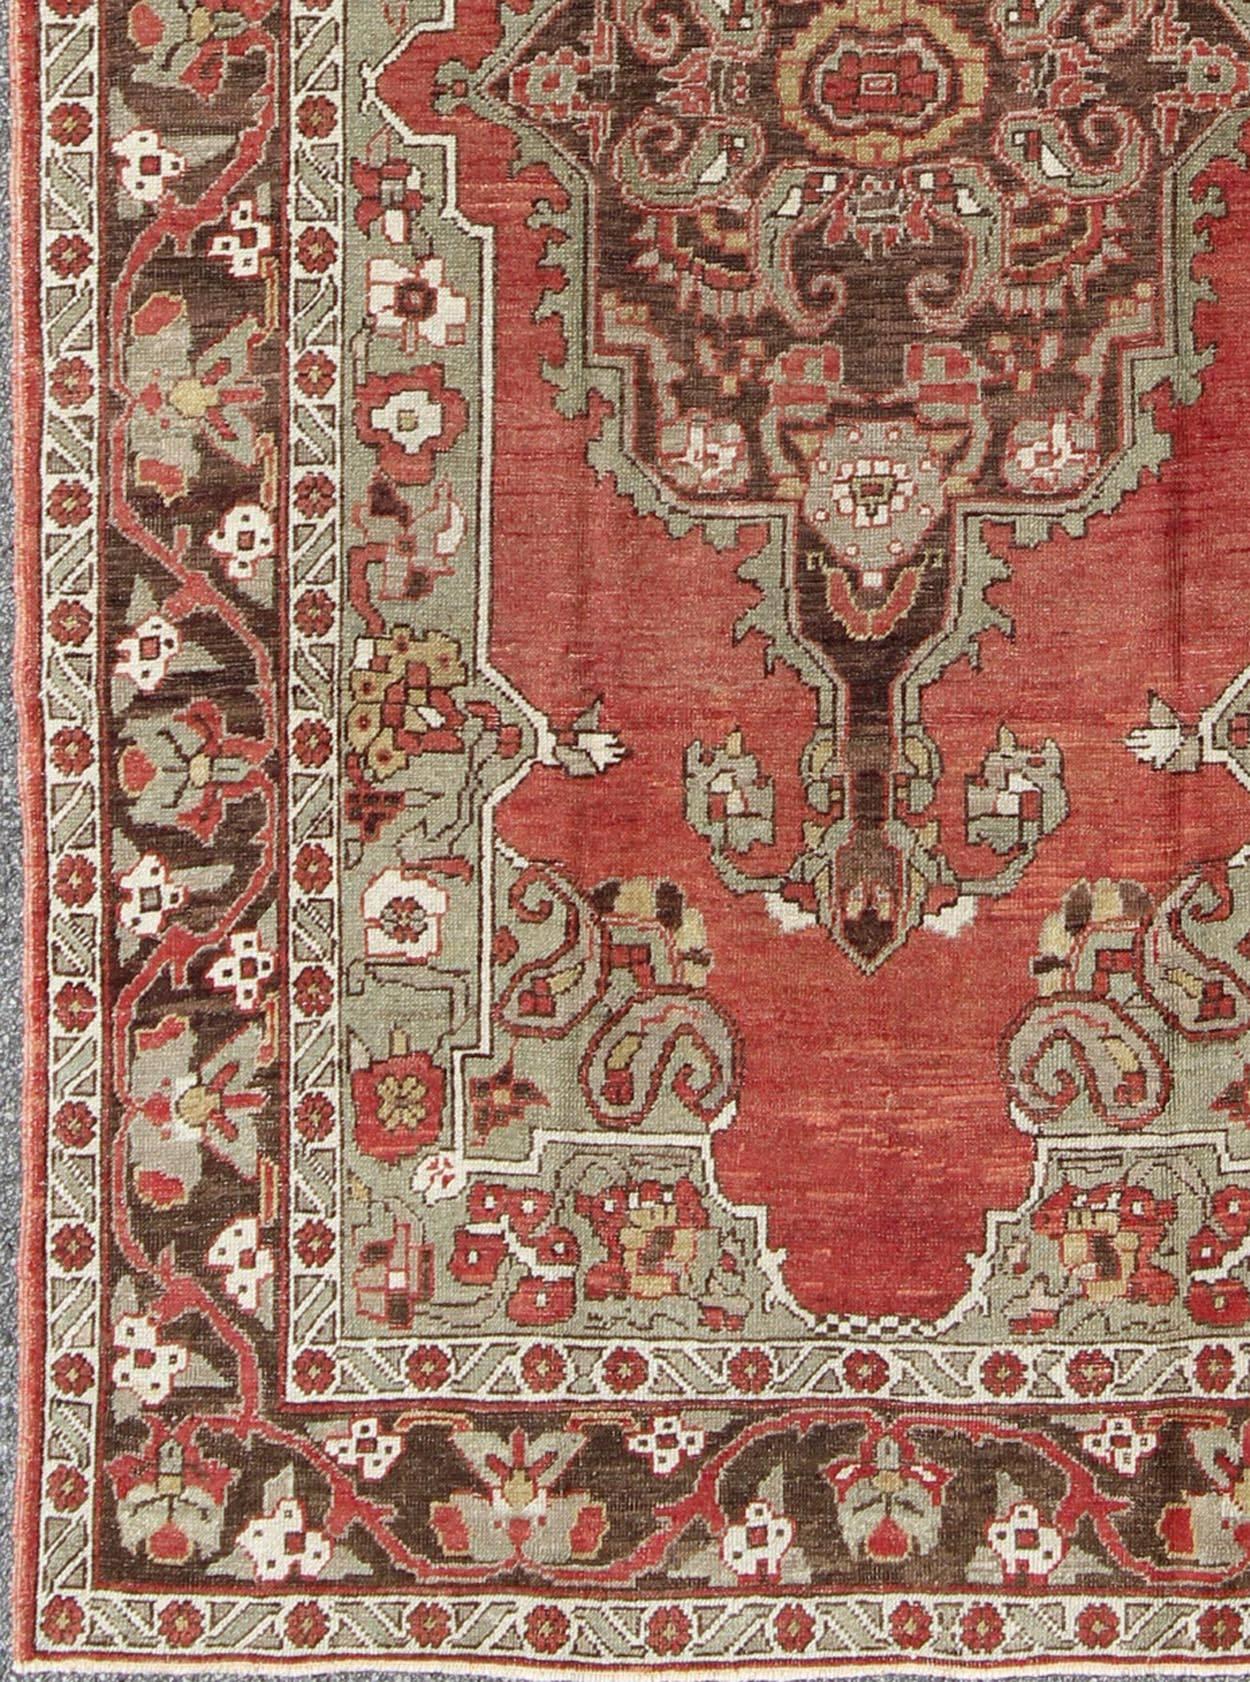 Antique Turkish Oushak Carpet with Medallion in Soft Red, Green and Brown. Rug/EL-12265. Antique Oushak, Antique Turkish Rug
This lovely antique Turkish Oushak rug displays a wonderful Sub-geometric design paired with a soft red abrash body. A